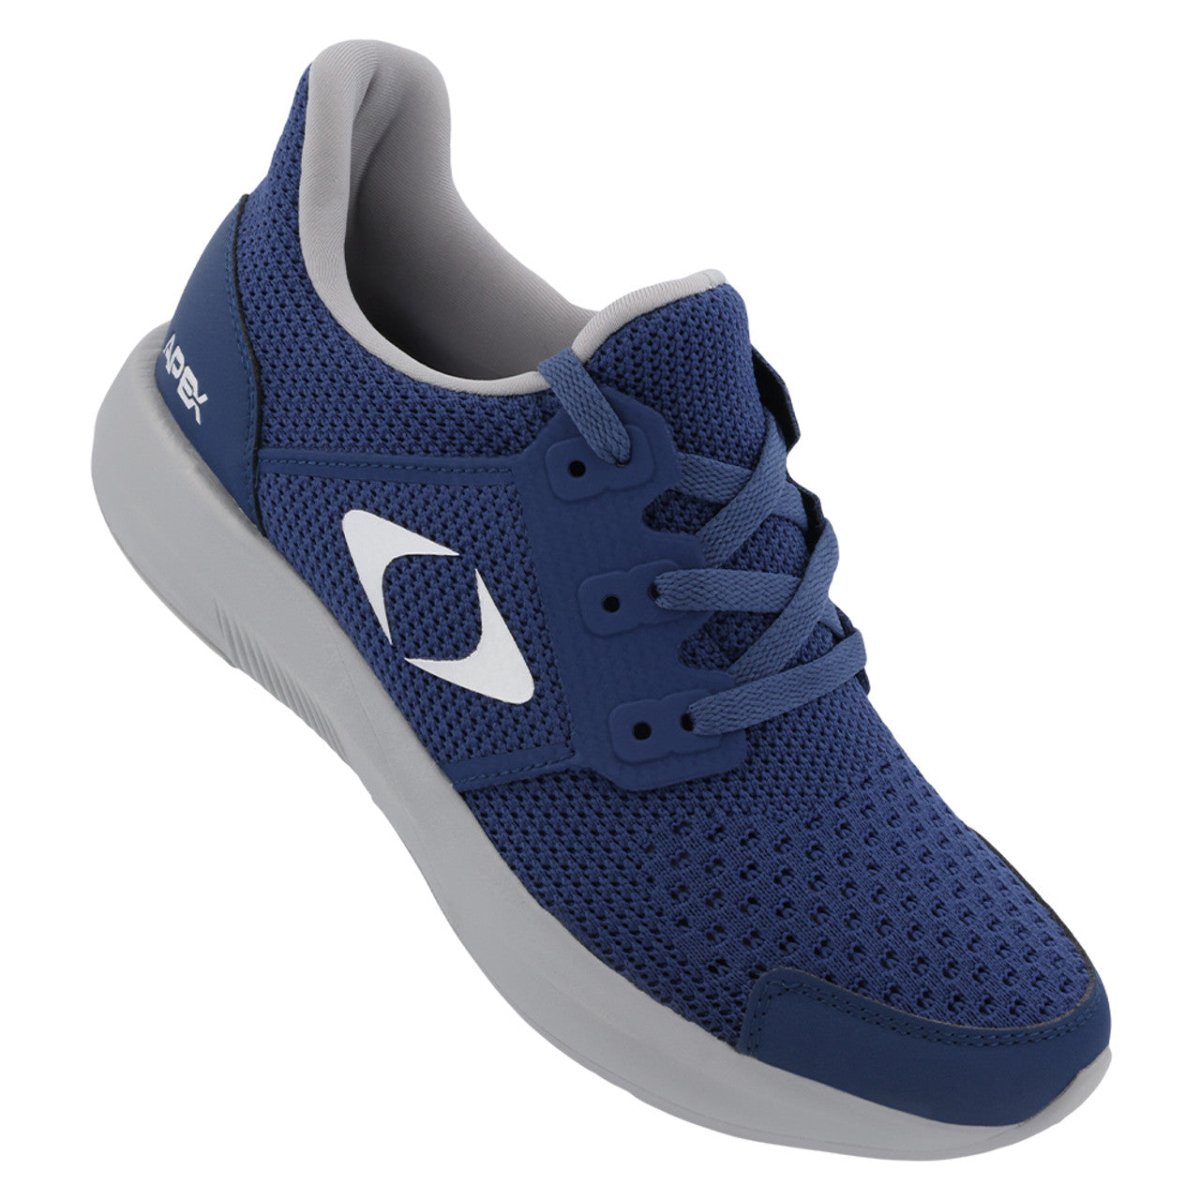 APEX P7300W PERFORMANCE ATHLETIC WOMEN'S SNEAKER IN NAVY - TLW Shoes